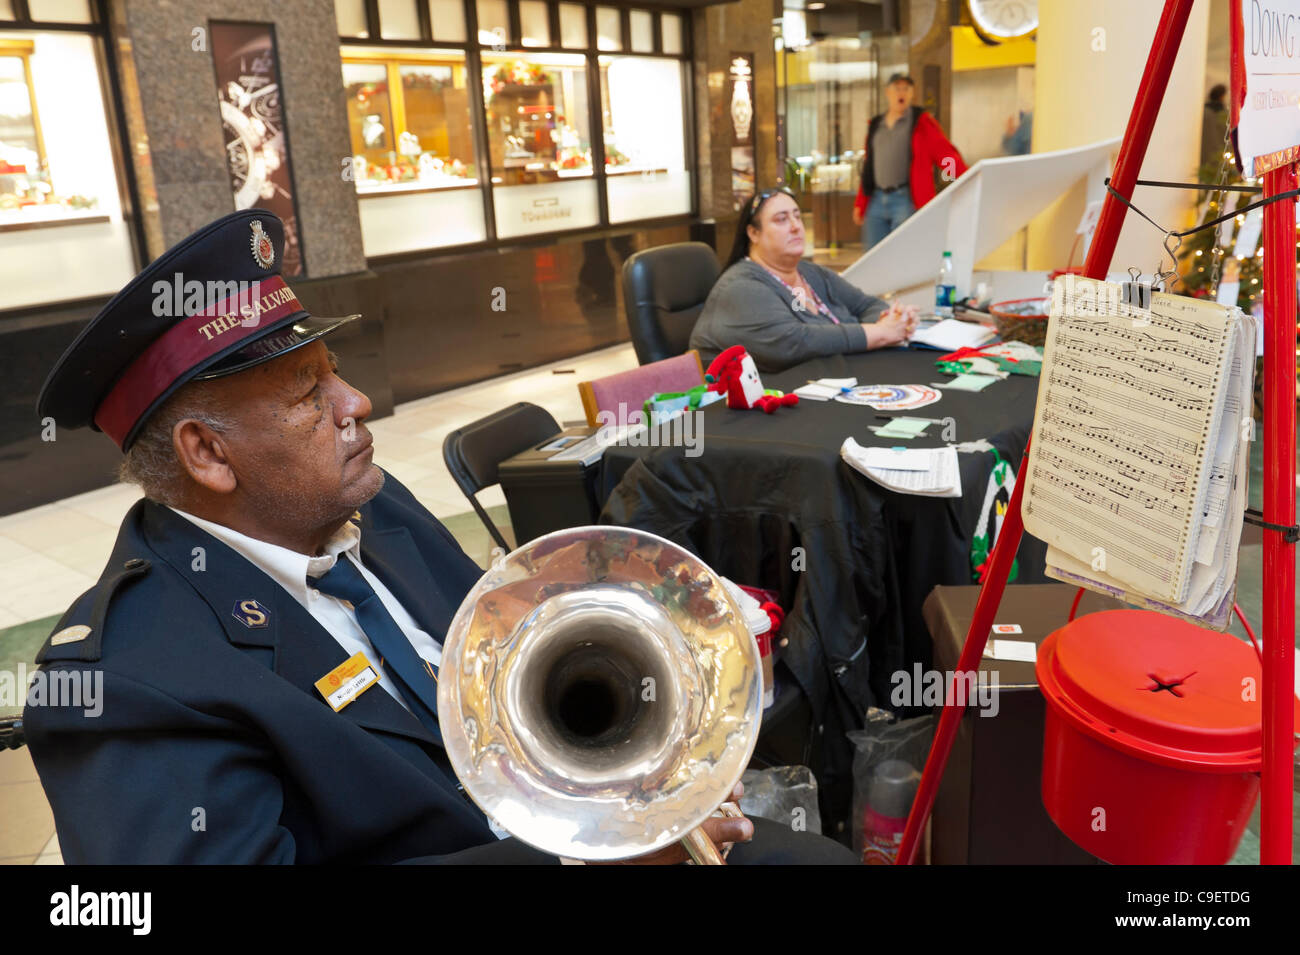 GARDEN CITY, NY, USA - DECEMBER 09: Members of Salvation Army, a charitable and religious organization, raise funds and run Toy Drive at Roosevelt Field Shopping Mall, New York, on Friday, December 9, 2011. Trumpeter Neville Lyttle (left) played for their Red Kettle Christmas Campaign. Stock Photo